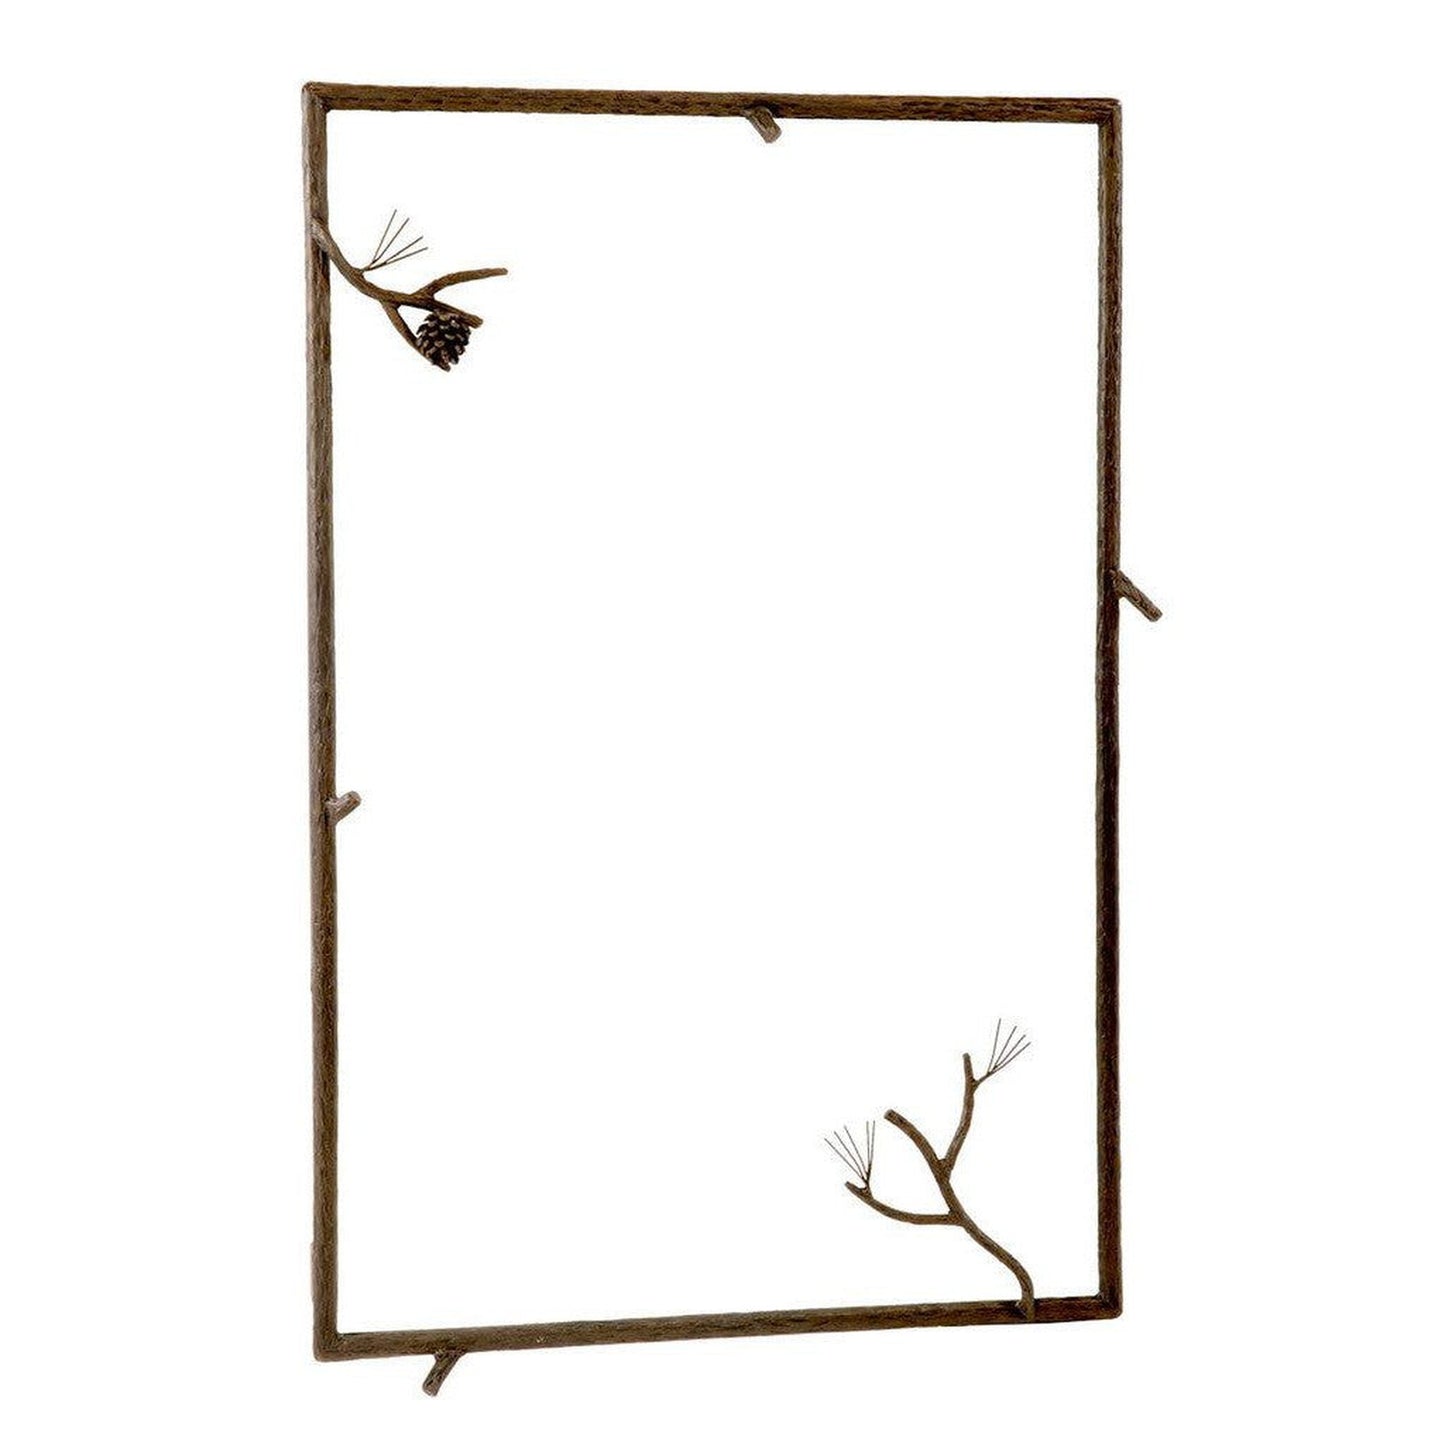 Stone County Ironworks Pine 25" x 21" Small Hand Rubbed Brass Iron Wall Mirror